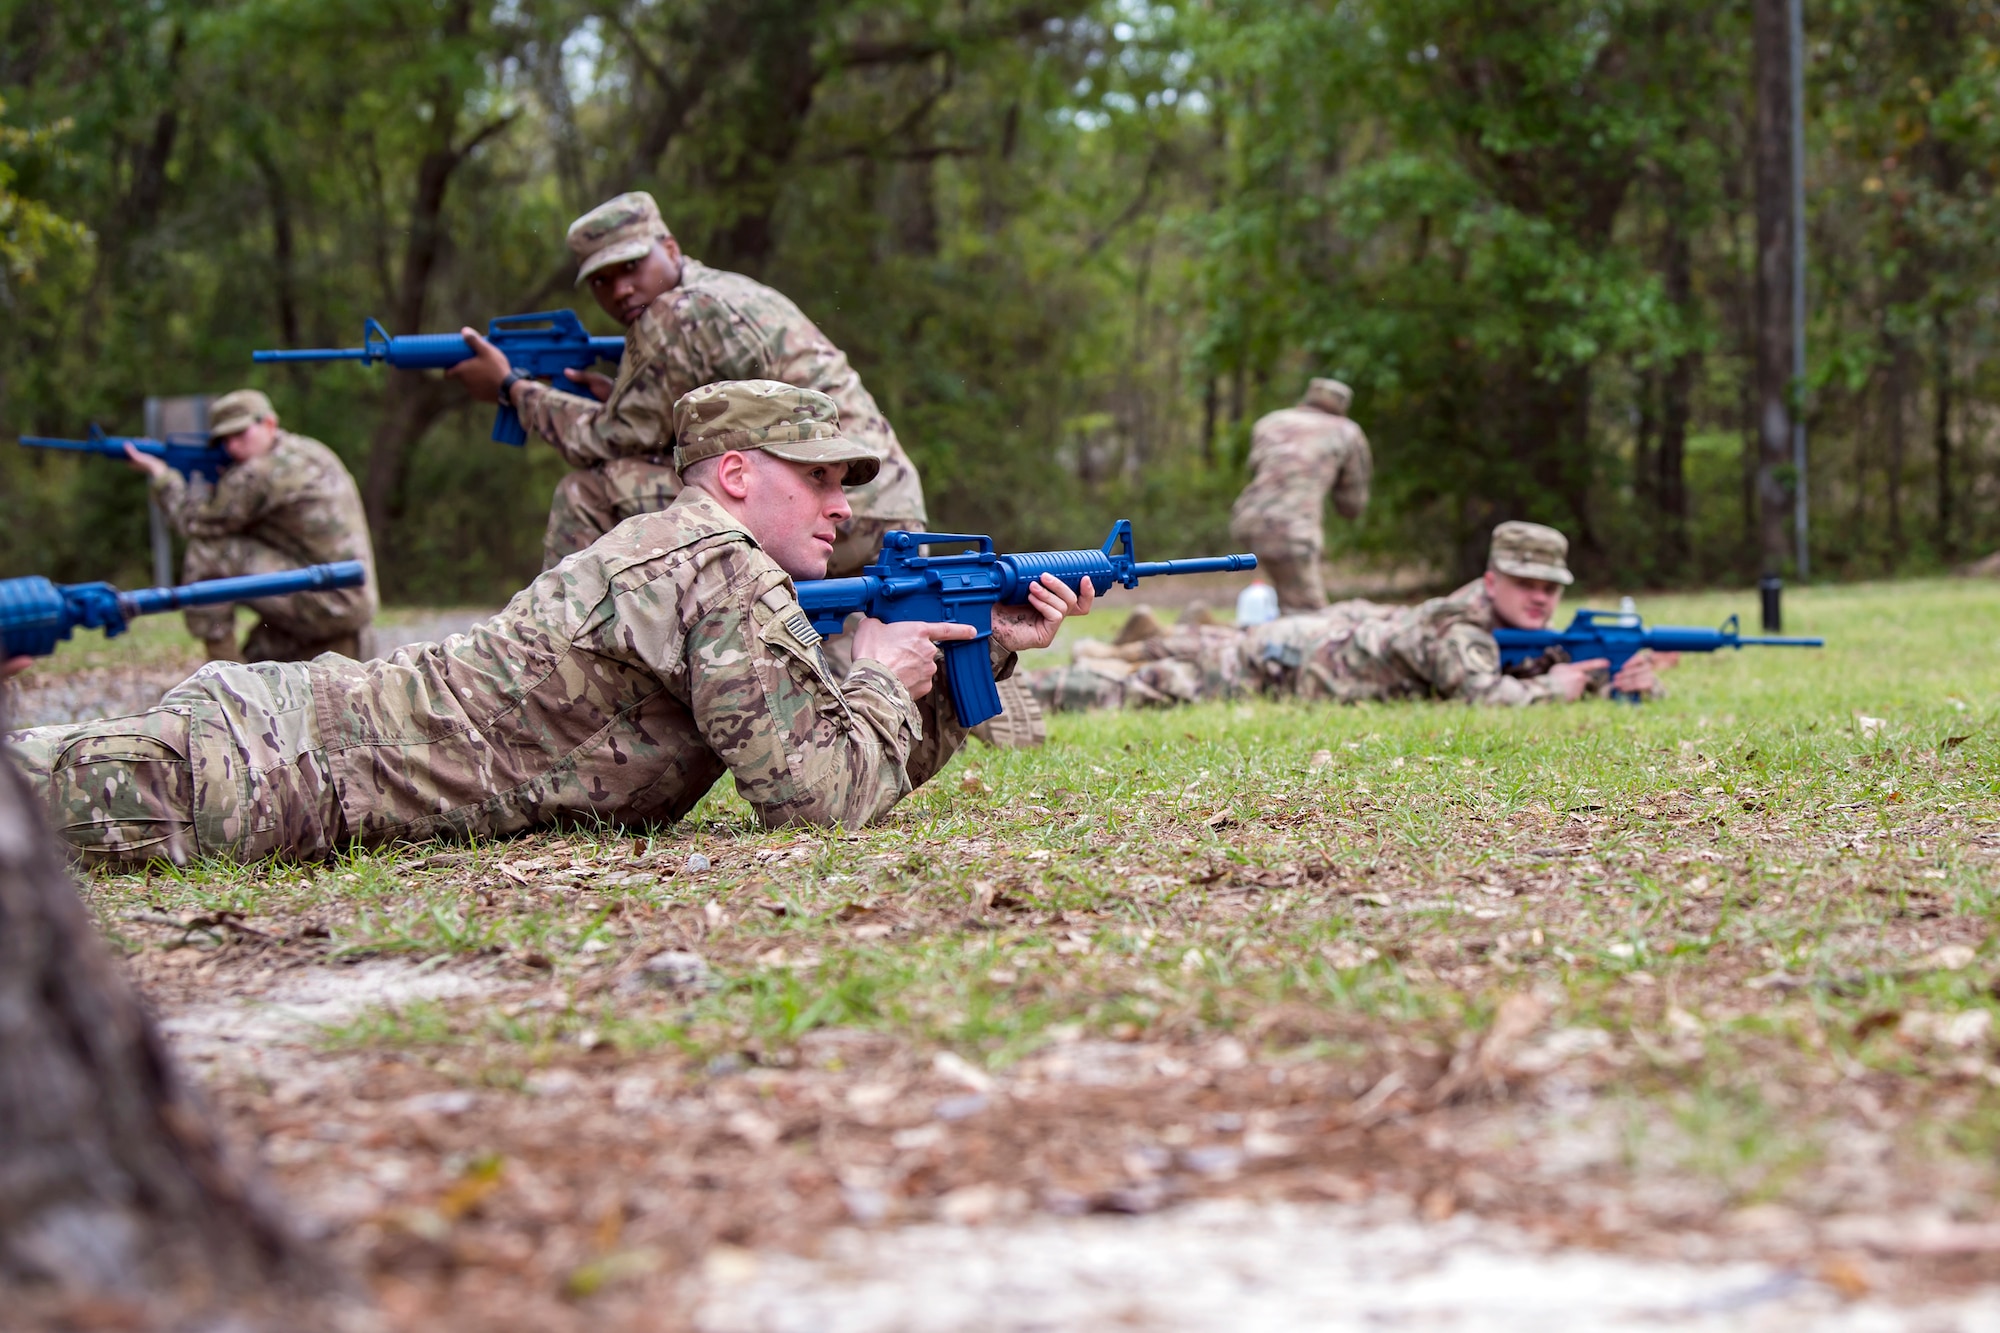 Airman 1st Class Alexander Moore, 824th Base Defense Squadron fireteam member, front, lays in the prone position during dismounted operations training, March 27, 2018, at Moody Air Force Base, Ga. The dismounted ops training is part of an Initial Qualification Training, which gives new Airmen coming into the 820th Base Defense Group an opportunity to learn a baseline of basic combat skills that will be needed to successfully operate within a cohesive unit while in a deployed environment. (U.S. Air Force photo by Airman Eugene Oliver)